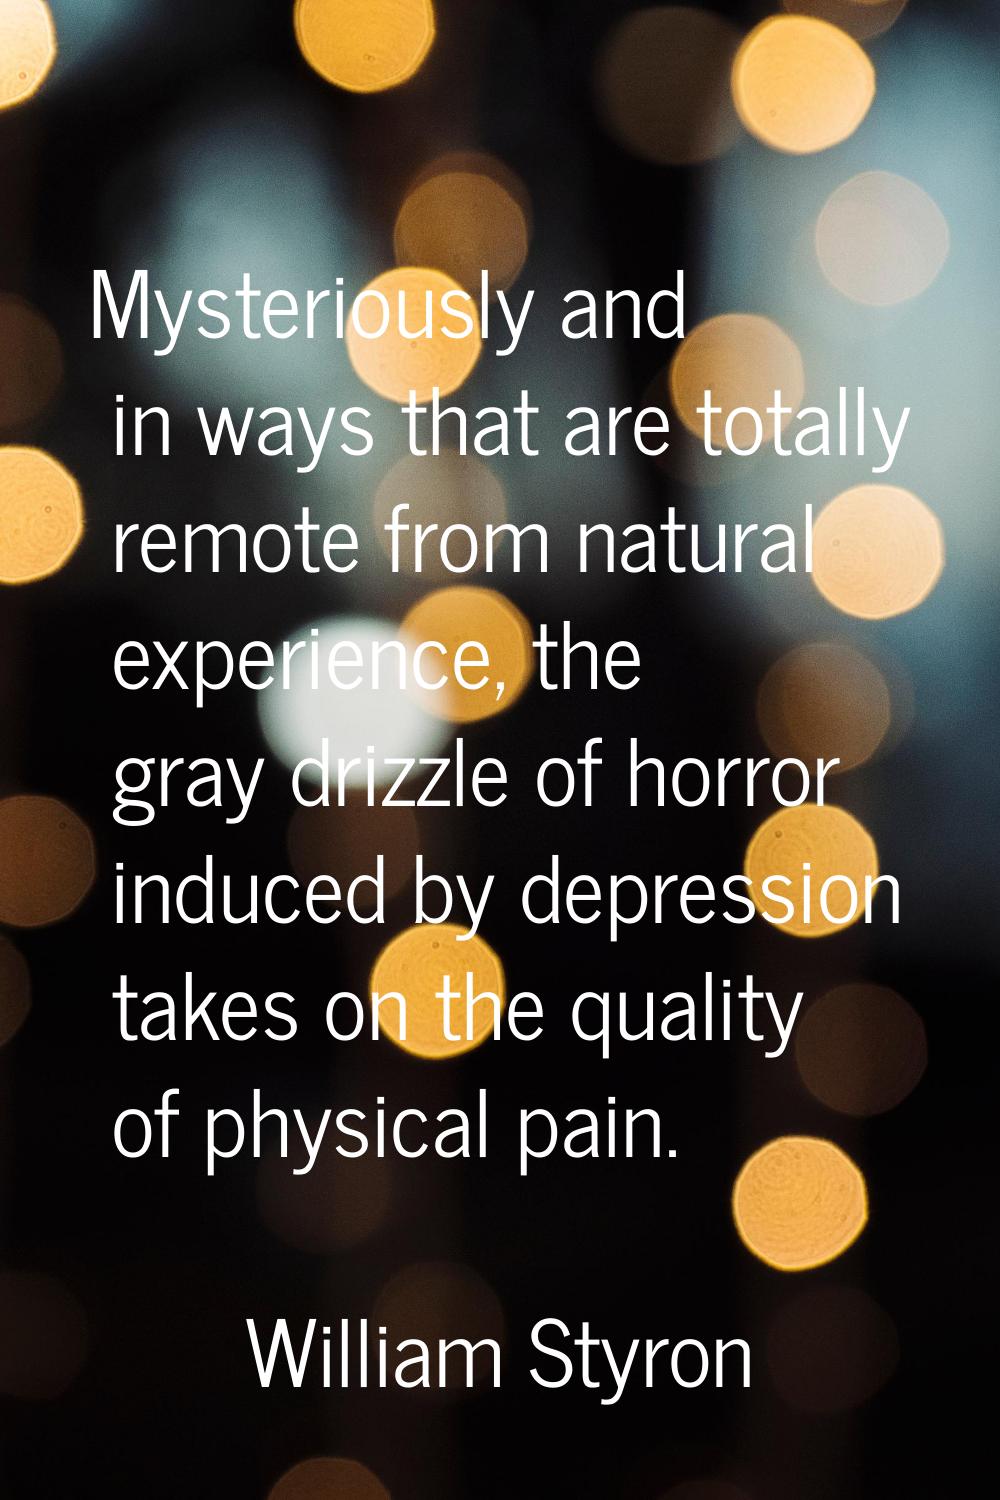 Mysteriously and in ways that are totally remote from natural experience, the gray drizzle of horro